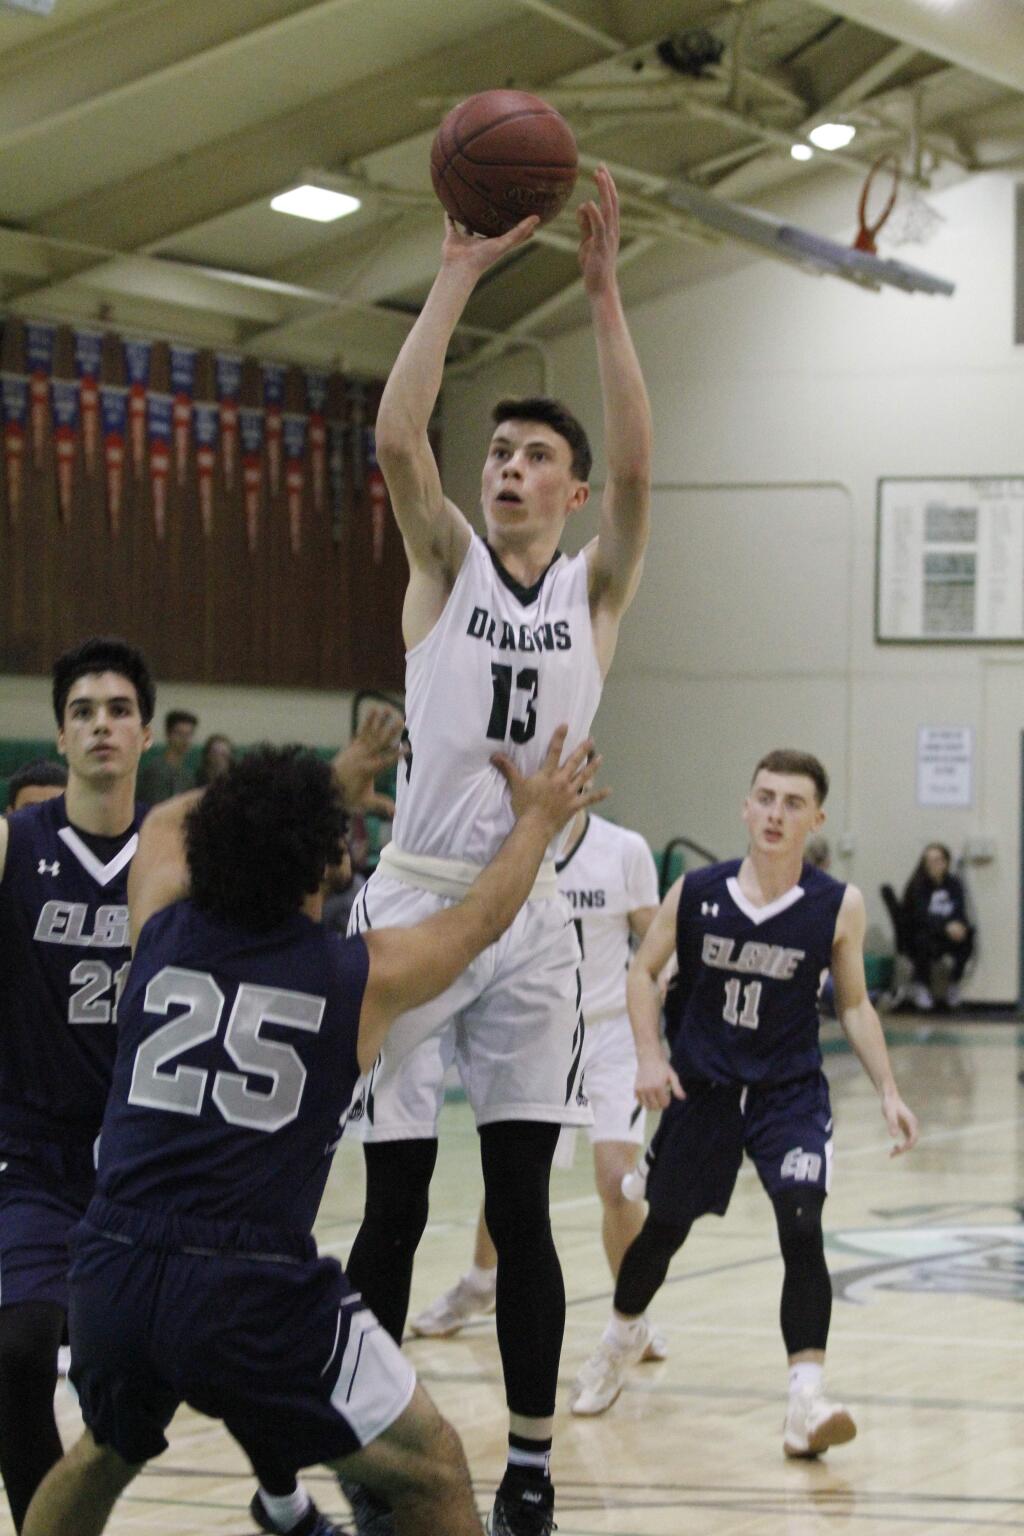 Jack Boydell shows the form that scored 28 points against Petaluma last week in this photo from an earlier game against Elsie Allen. (Bill Hoban/Index-Tribune)